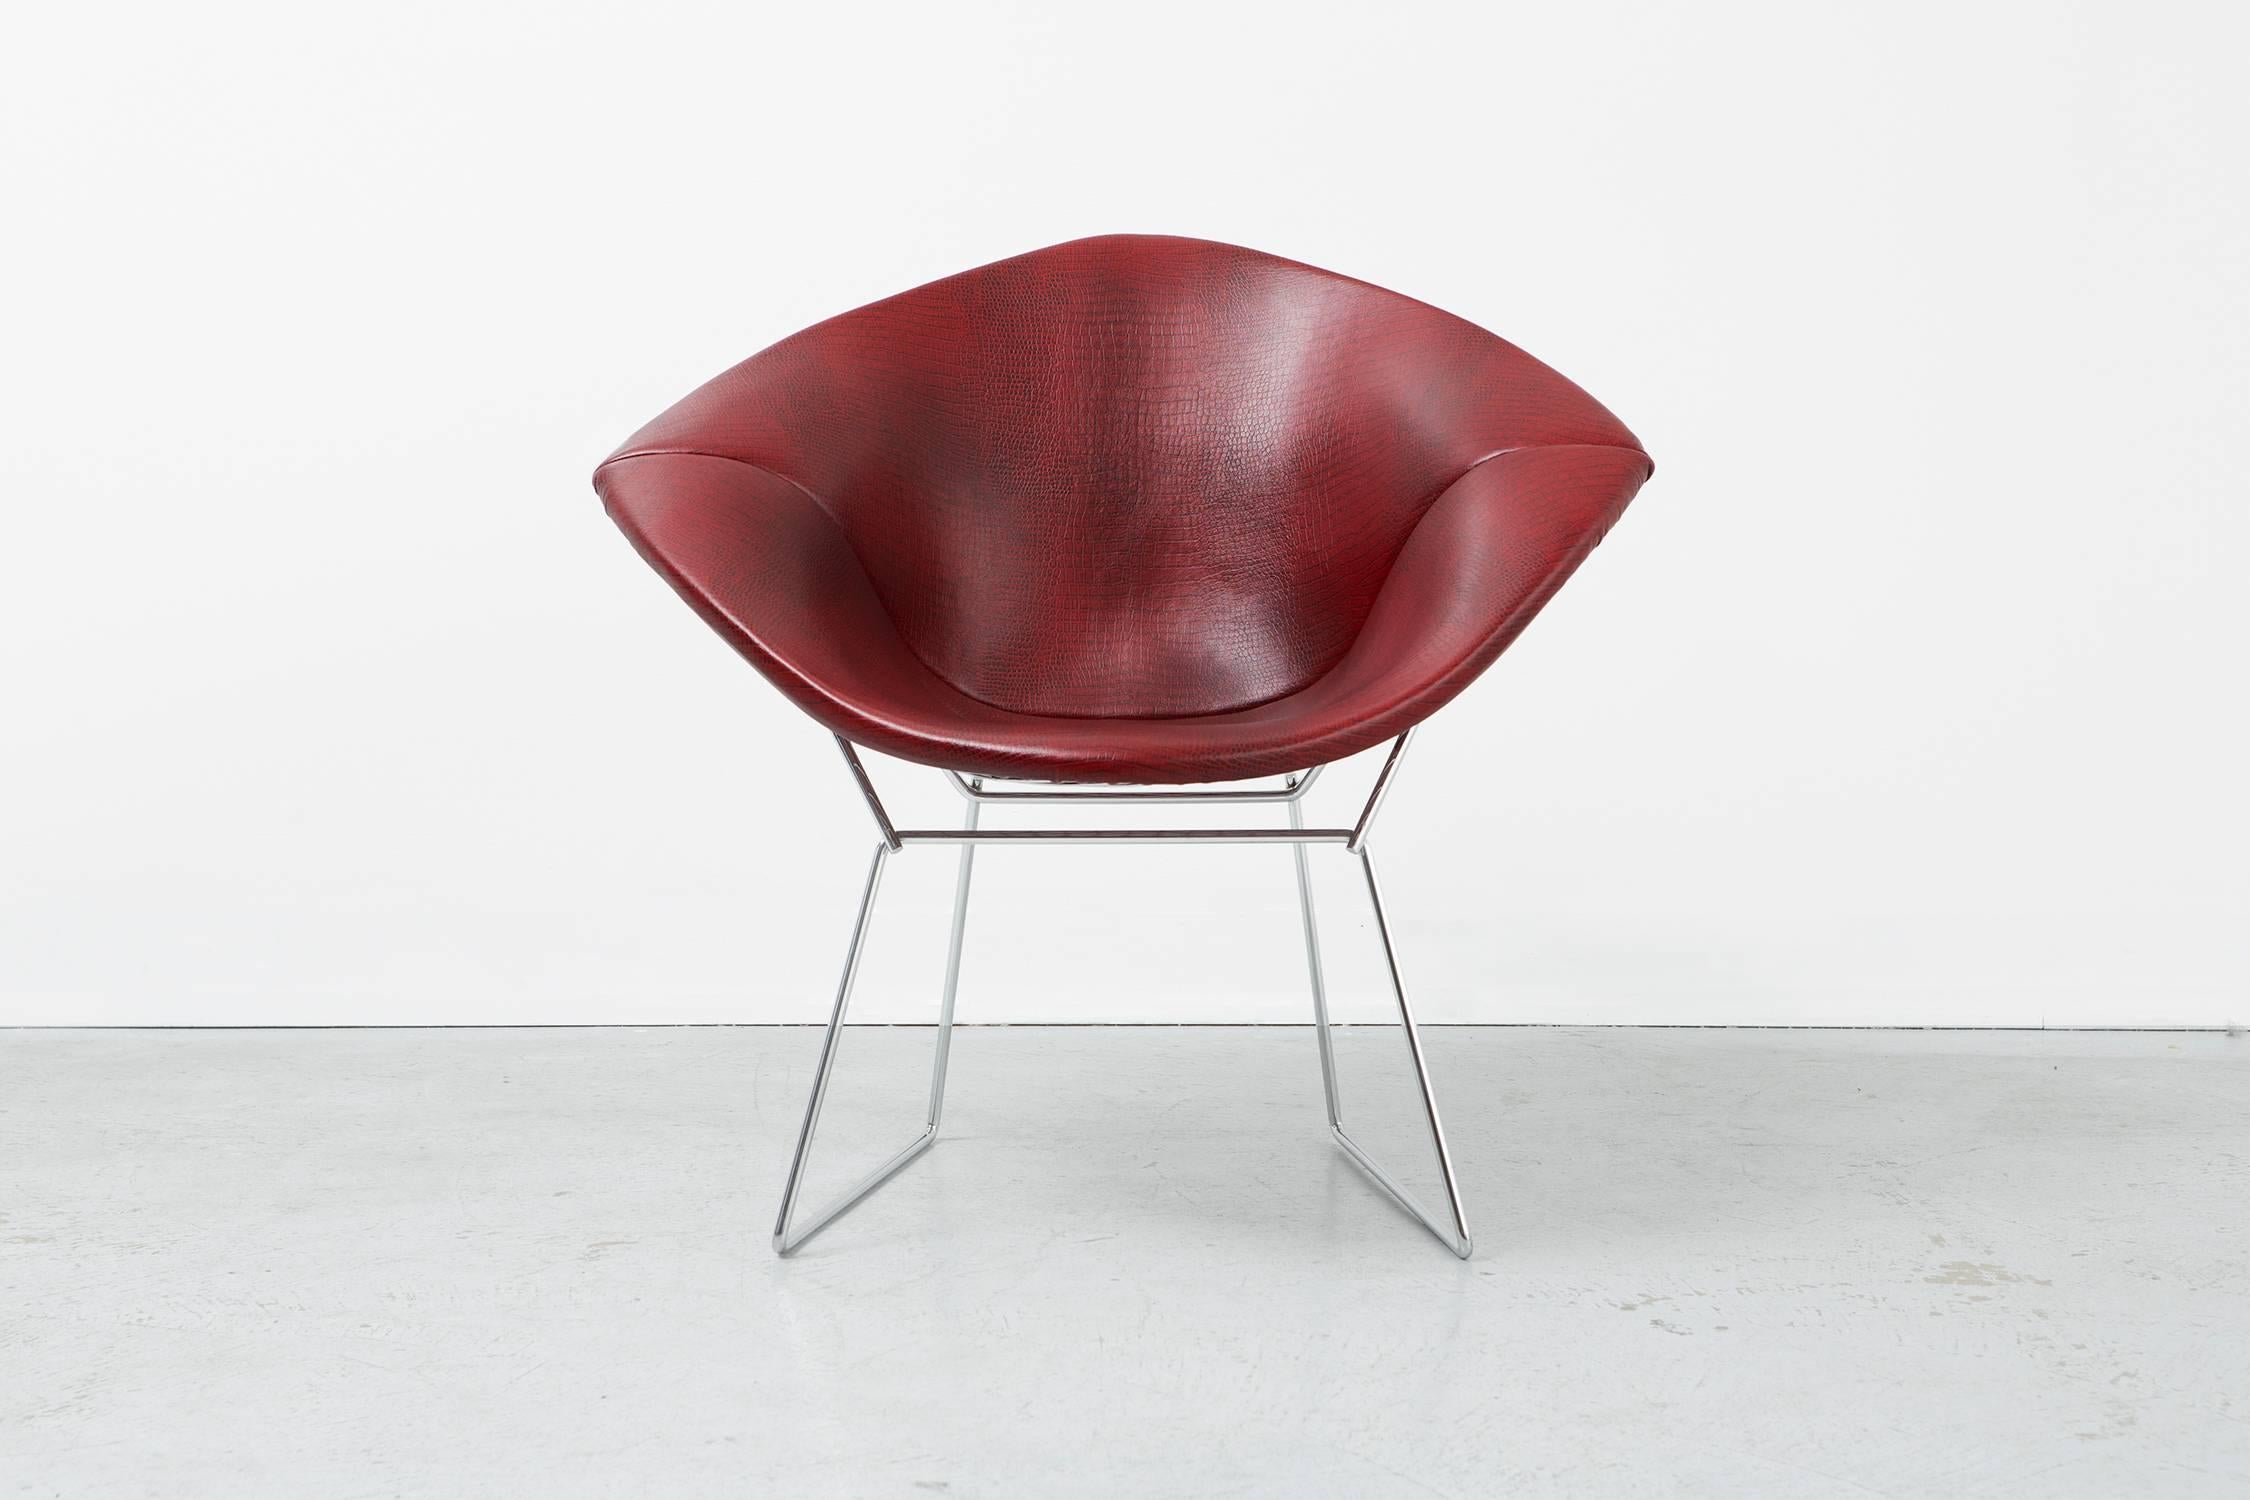 Diamond chair

Designed by Harry Bertoia for Knoll

USA, d 1952 / c 1970s

Reupholstered in faux leather + chrome

30 ⅝